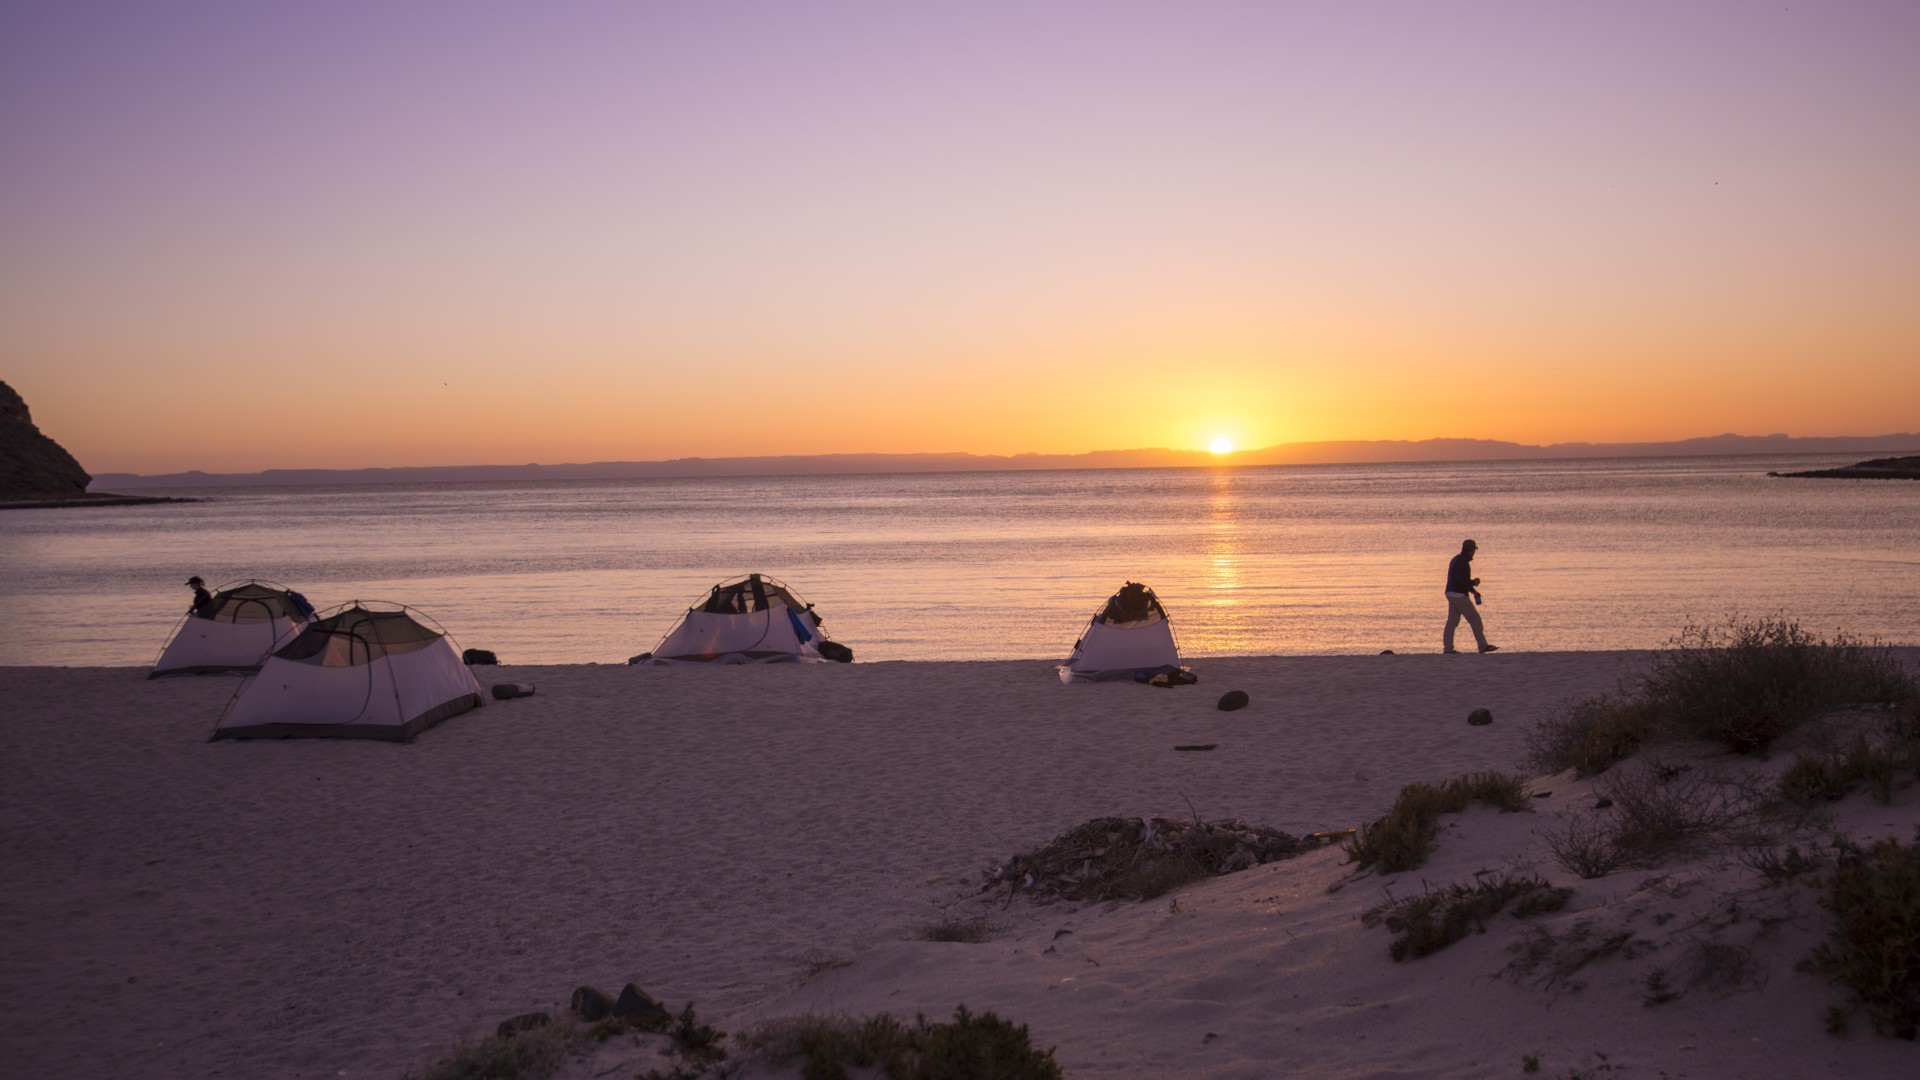 Group of tents on a white sand beach overlooking the Sea of Cortez at sunset